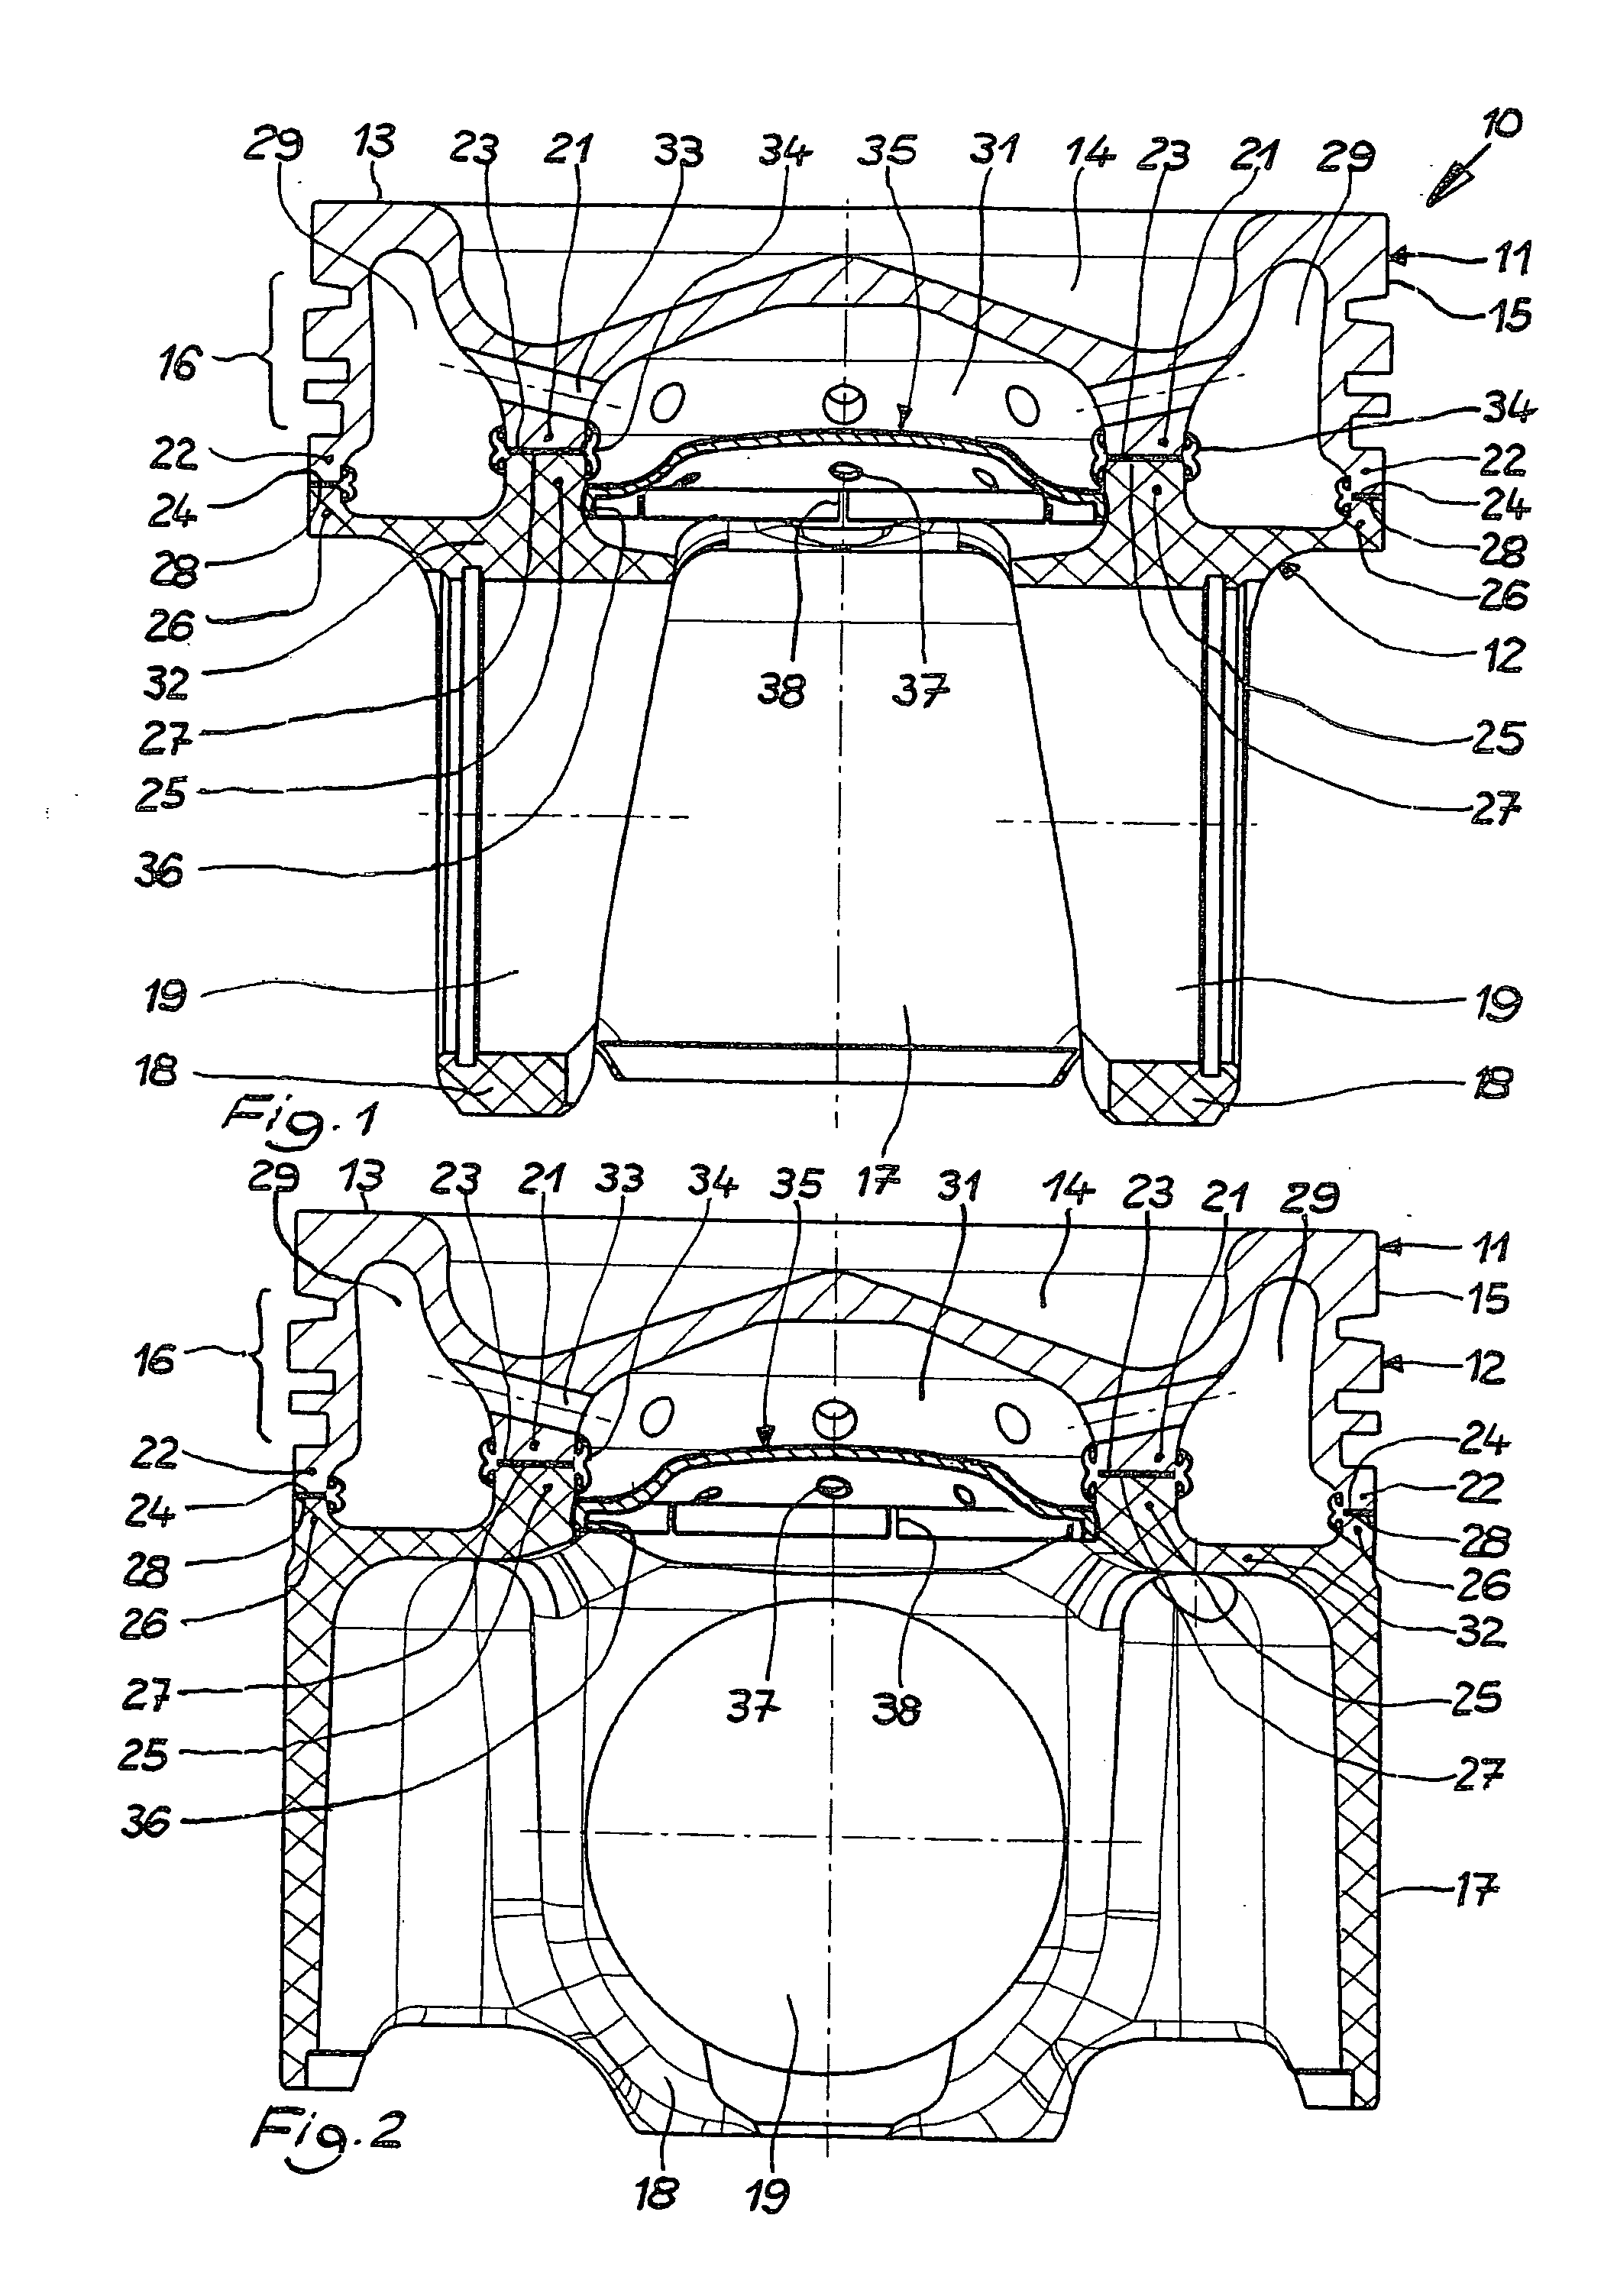 Multi-part piston for an internal combustion engine and method for its production